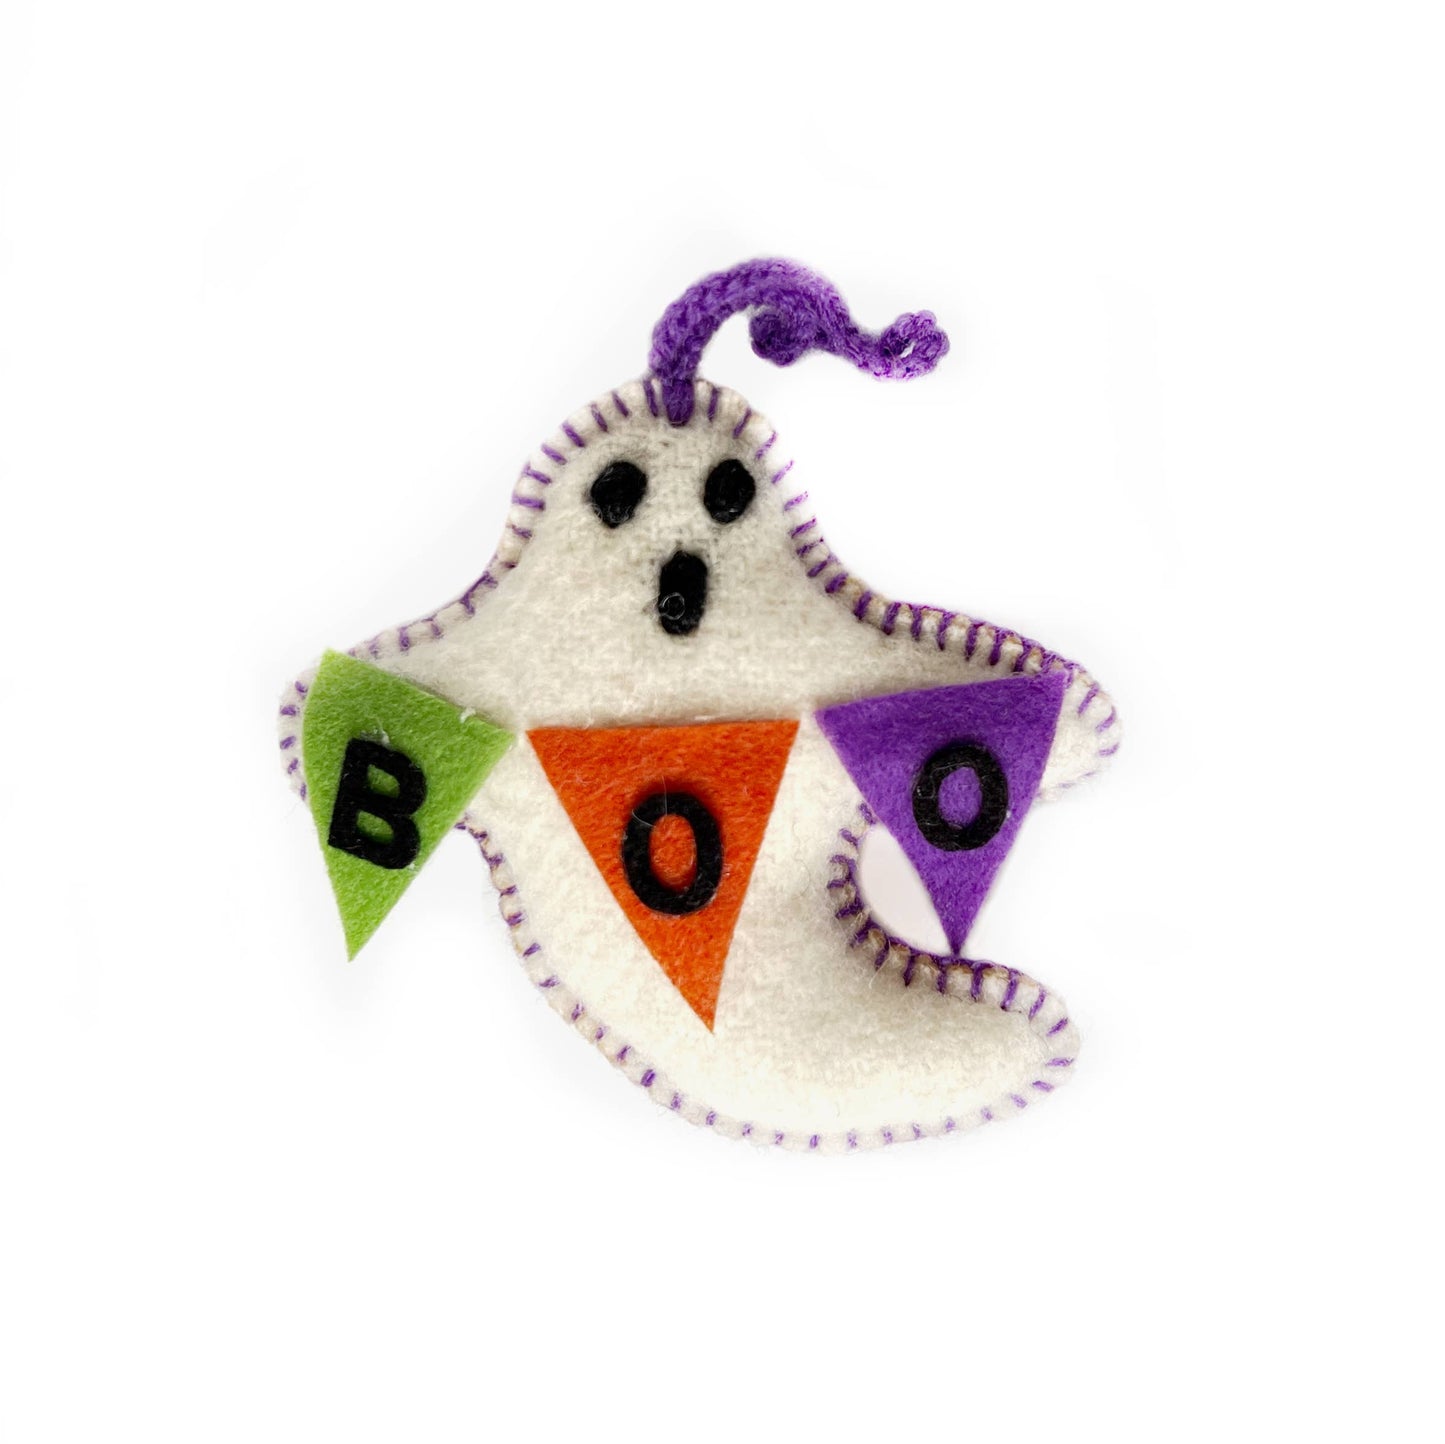 BOO! Ghost Embroidered Wool Halloween Ornament